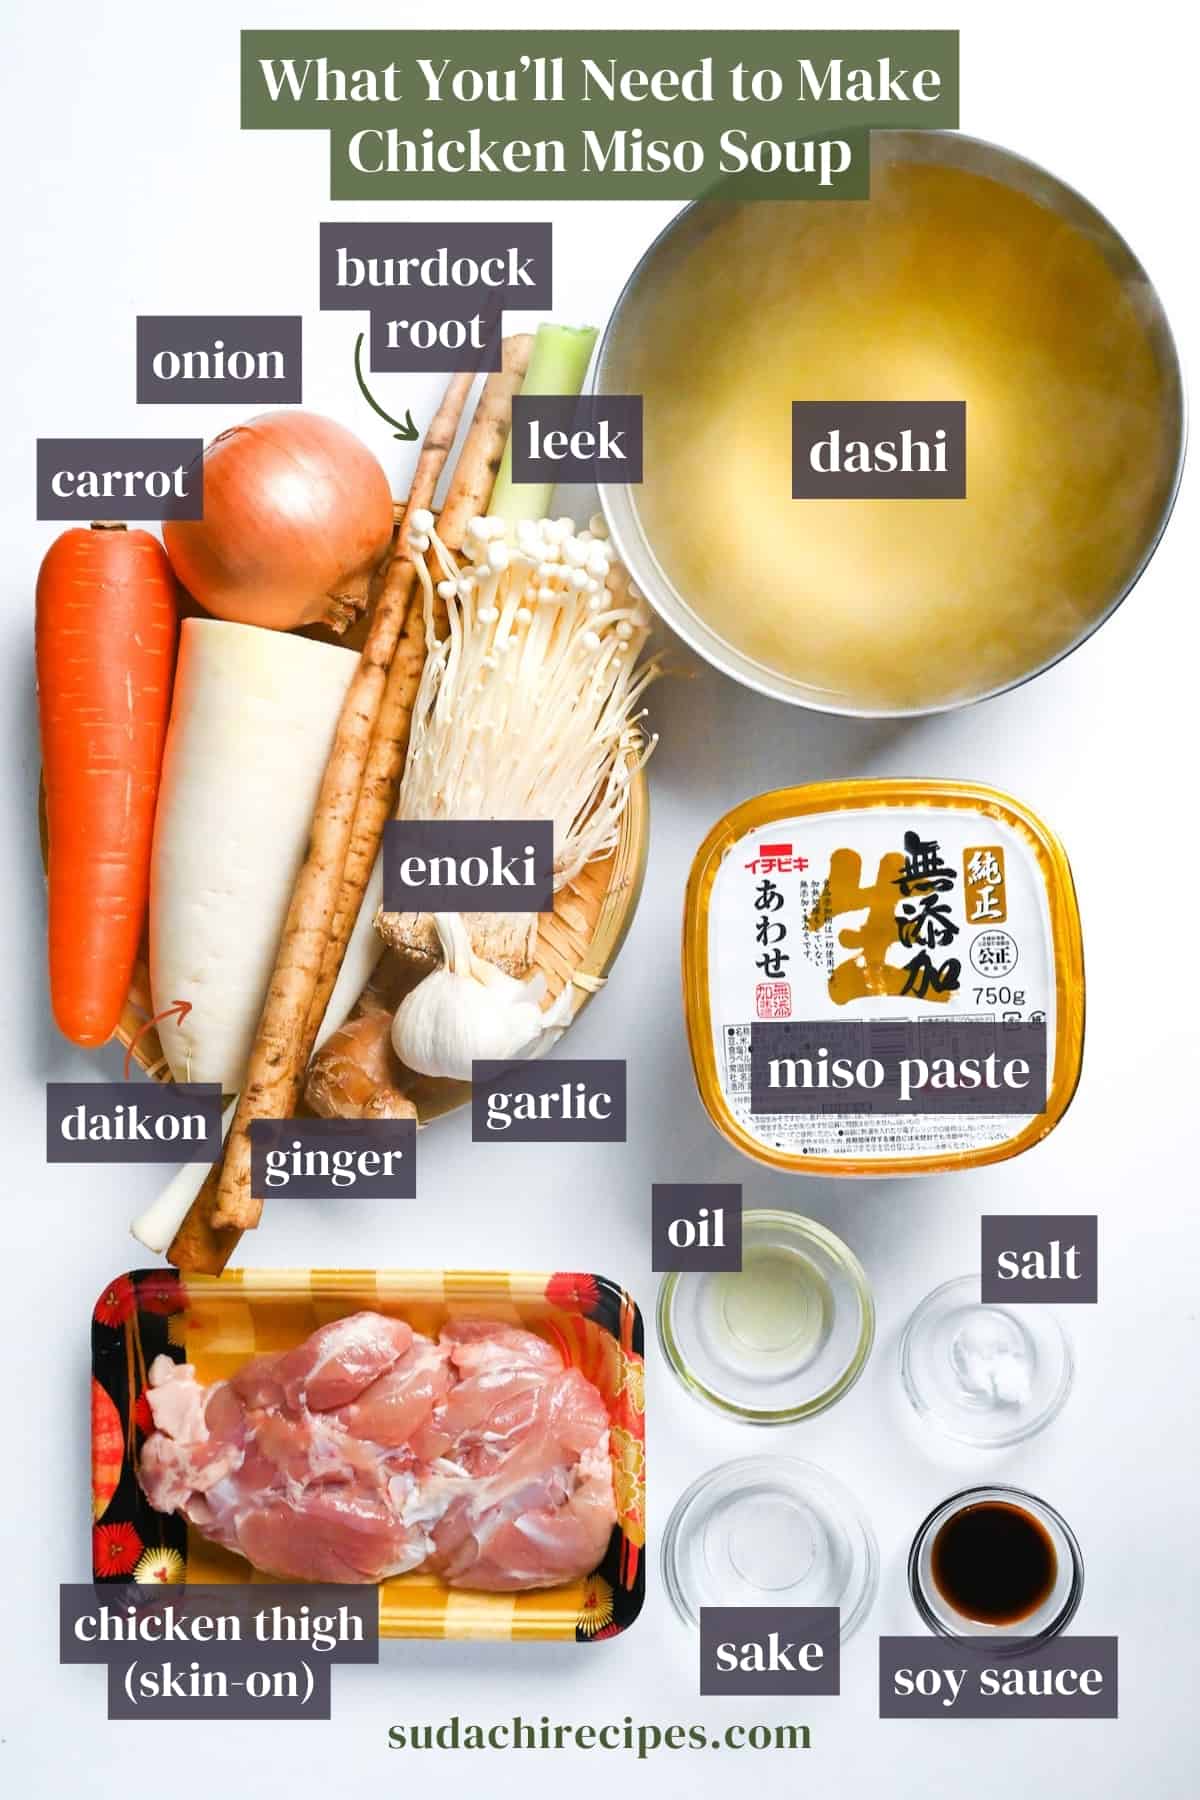 ingredients used to make chicken miso soup on a white background with labels